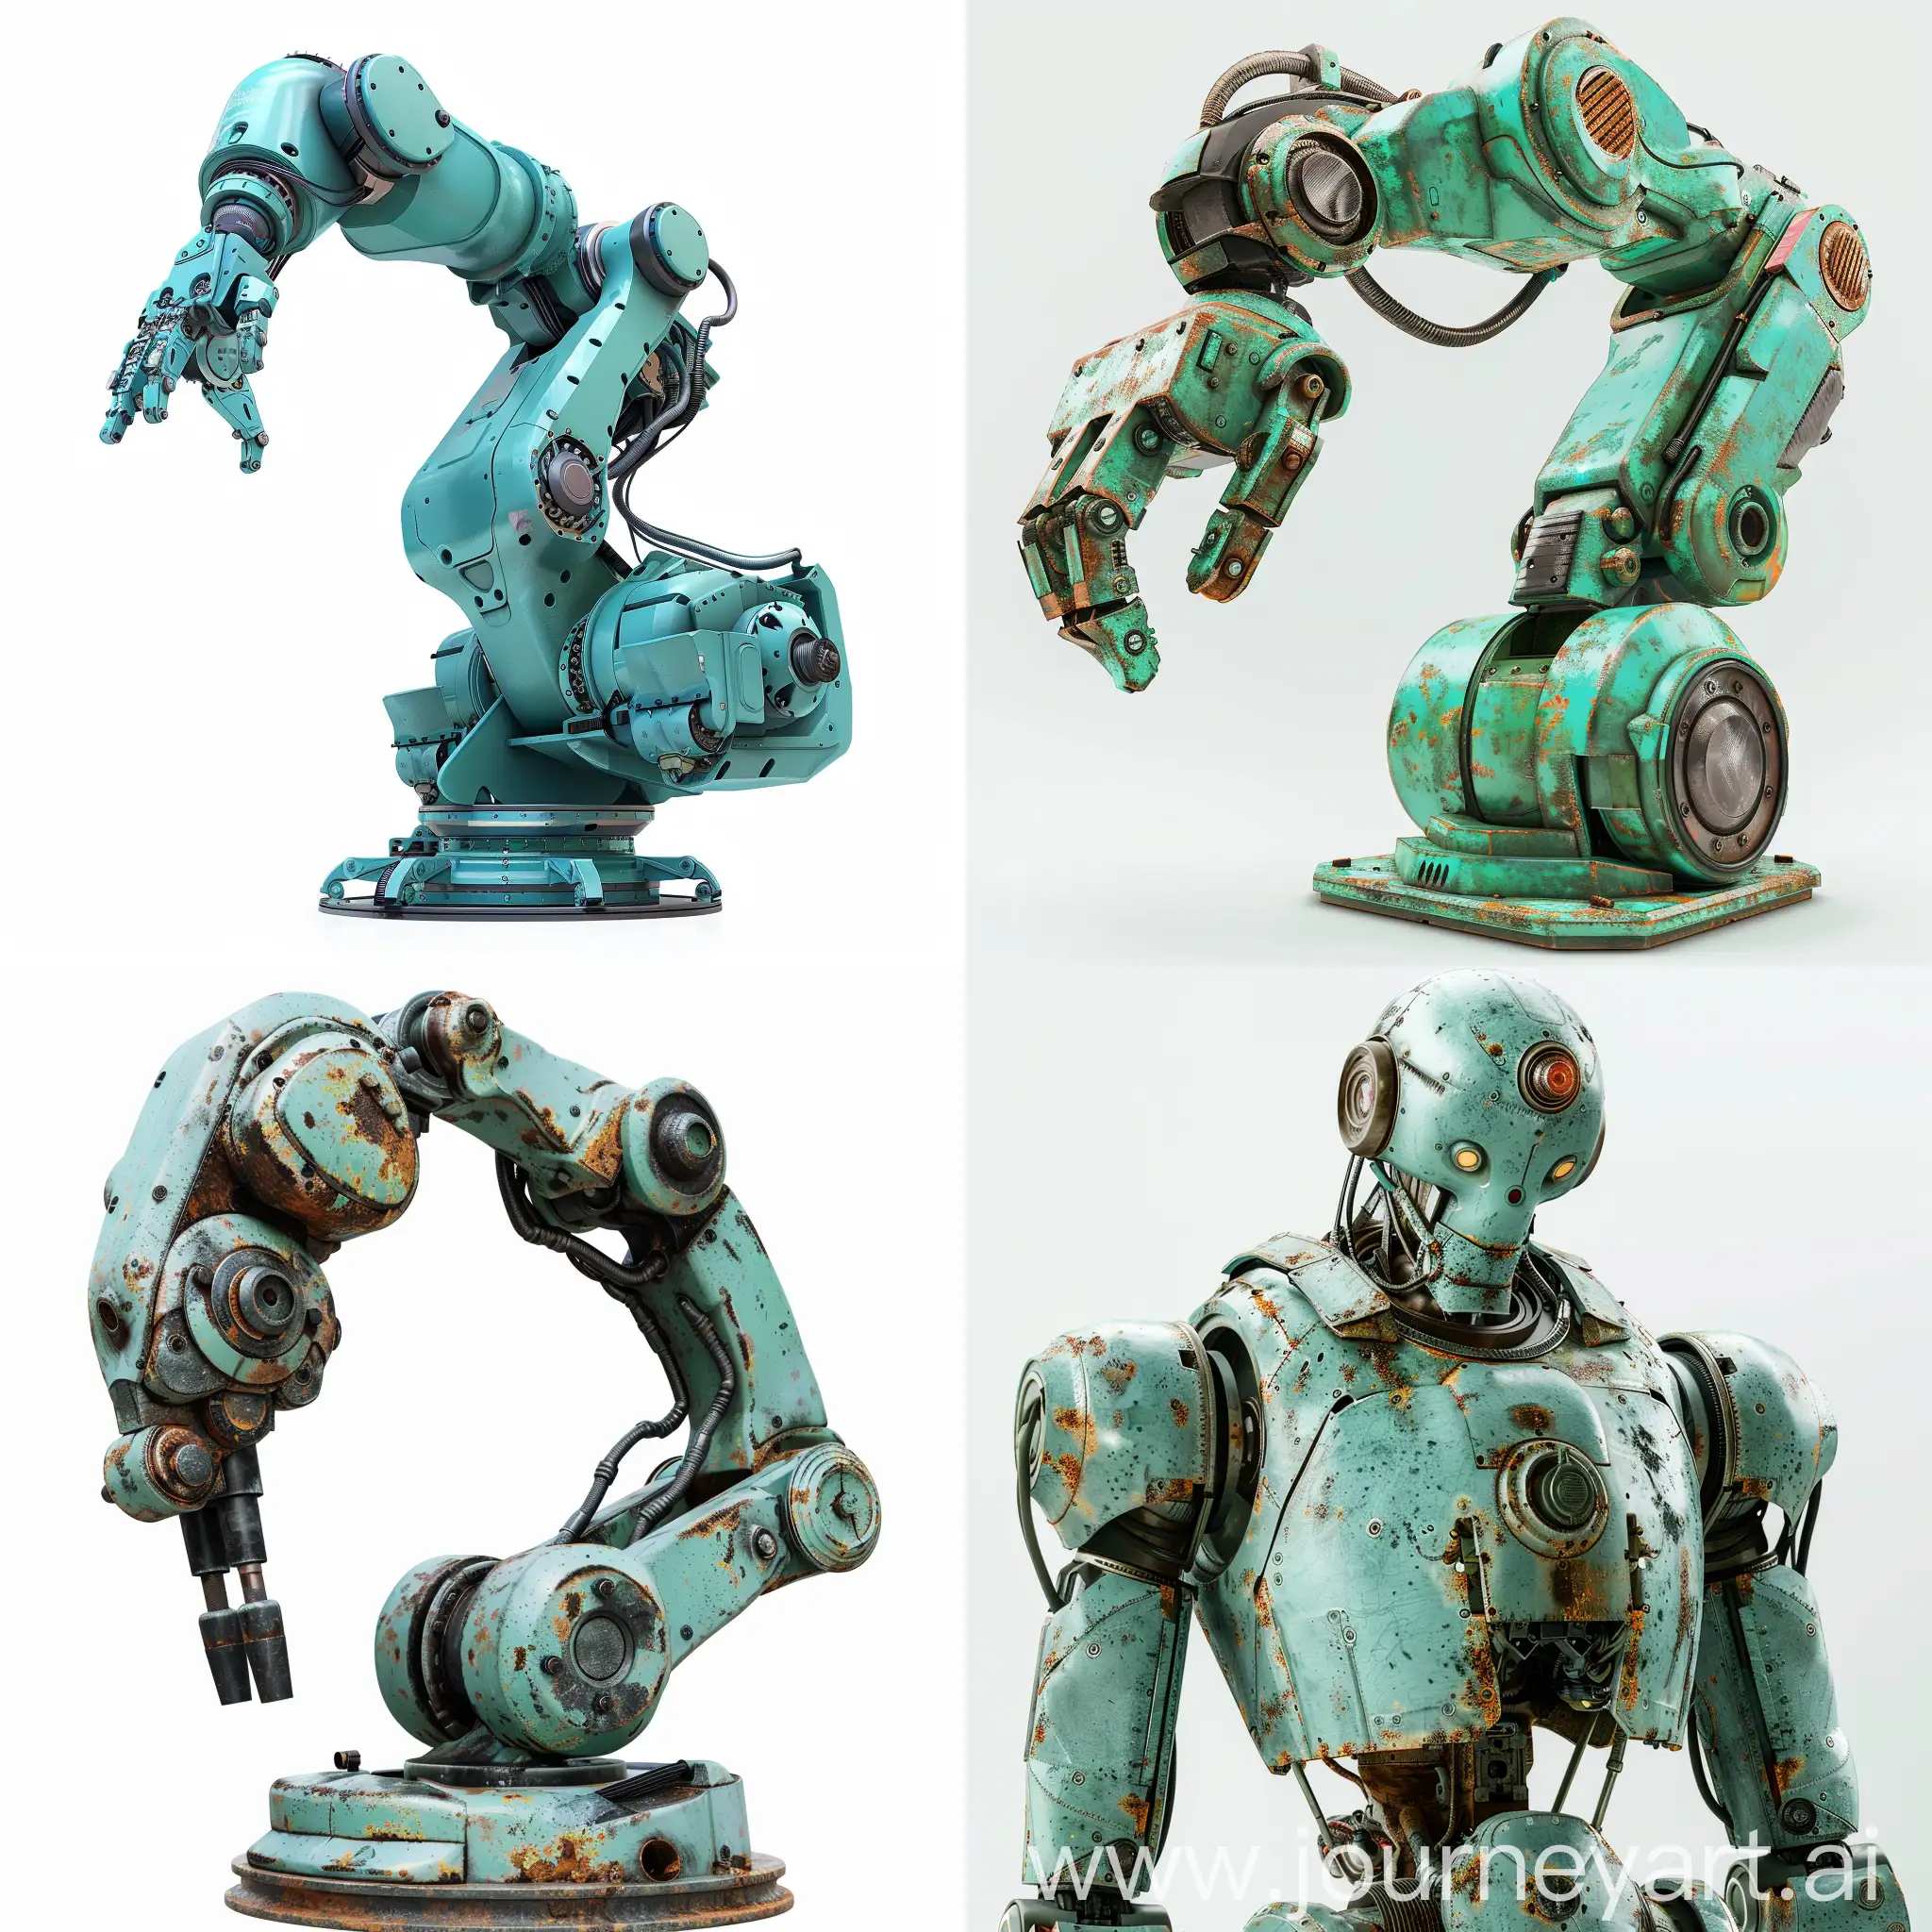 Industrial-Robot-Model-in-GreenBlue-Metal-Appearance